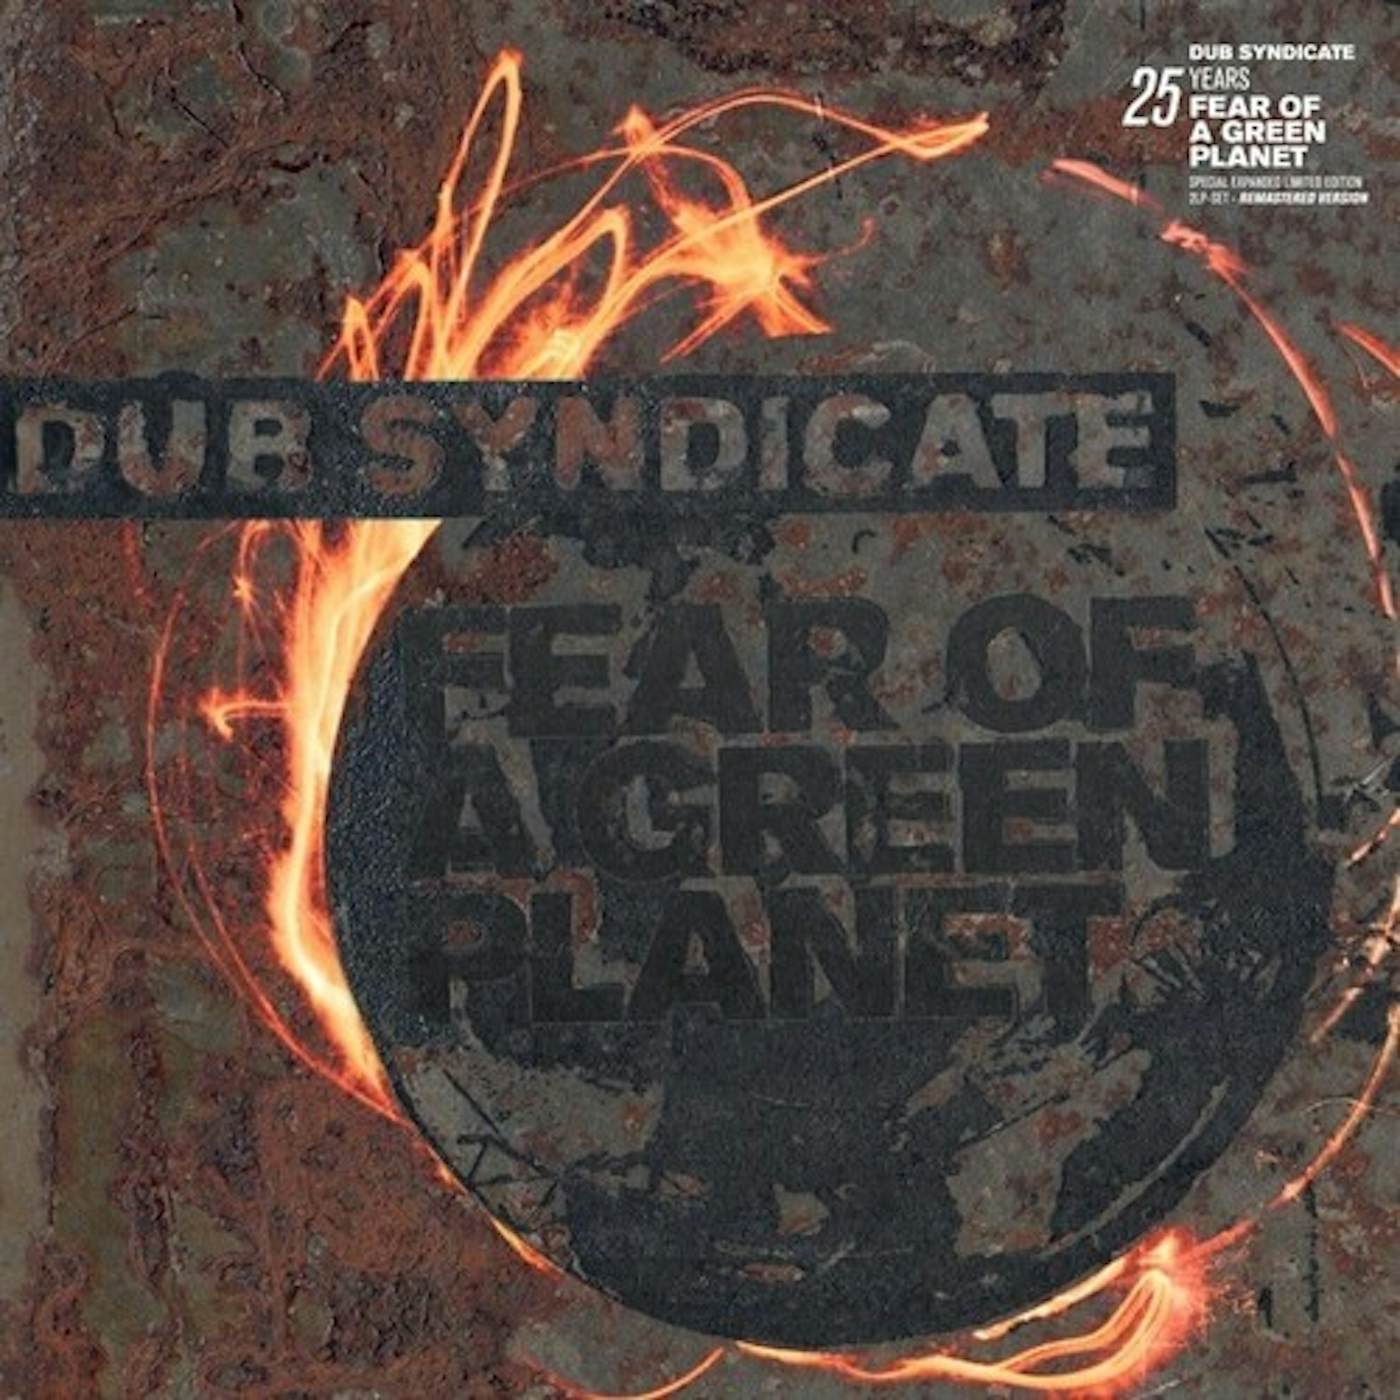 Dub Syndicate FEAR OF A GREEN PLANET (25TH ANNIVERSARY EXPANDED CD